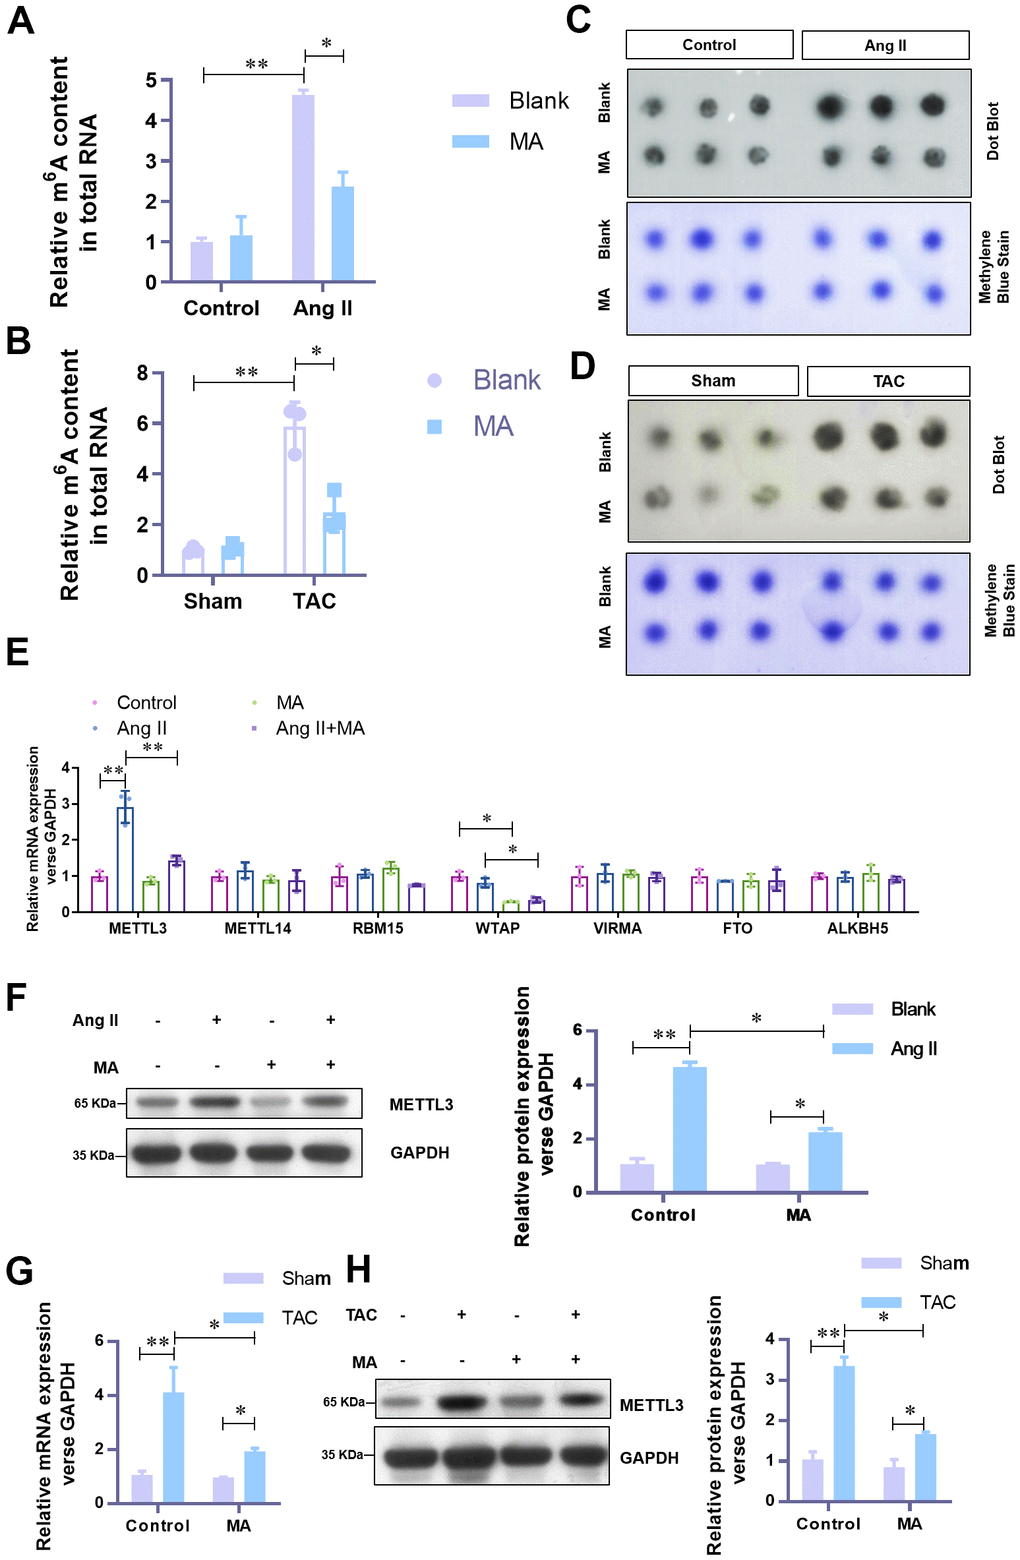 MA-induced significant impairment of the elevated level of m6A methylation and METTL3 in hypertrophic cardiomyocytes in vitro and in vivo. (A) The effect of MA on the total RNA m6A methylation content in Ang-II induced hypertrophic NMCMs and (B) TAC induced hypertrophic LV tissues (detected with the EpiQuik m6A RNA Methylation assay kit). (C) The effect of MA on the total RNA m6A methylation content in Ang-II induced hypertrophic NMCMs and (D) TAC induced hypertrophic LV tissues (detected with by Dot Blot). Methylene blue staining served as a loading control. (E) Real-time PCR analysis of the mRNA expression levels of the major methyltransferases (METTL3, METTL14, RBM15, WTAP, VIRMA) and demethylases (FTO and ALKBH5). (F) Western blot analysis of the effect of MA on the protein level of METTL3 in Ang-II induced hypertrophic NMCMs. (G) Real-time PCR analysis of the effect of MA on the protein level of METTL3 in TAC induced hypertrophic LV tissues. (H) Western blot detection of the effect of MA on the protein level of METTL3 in TAC-induced hypertrophic LV tissues; *PP